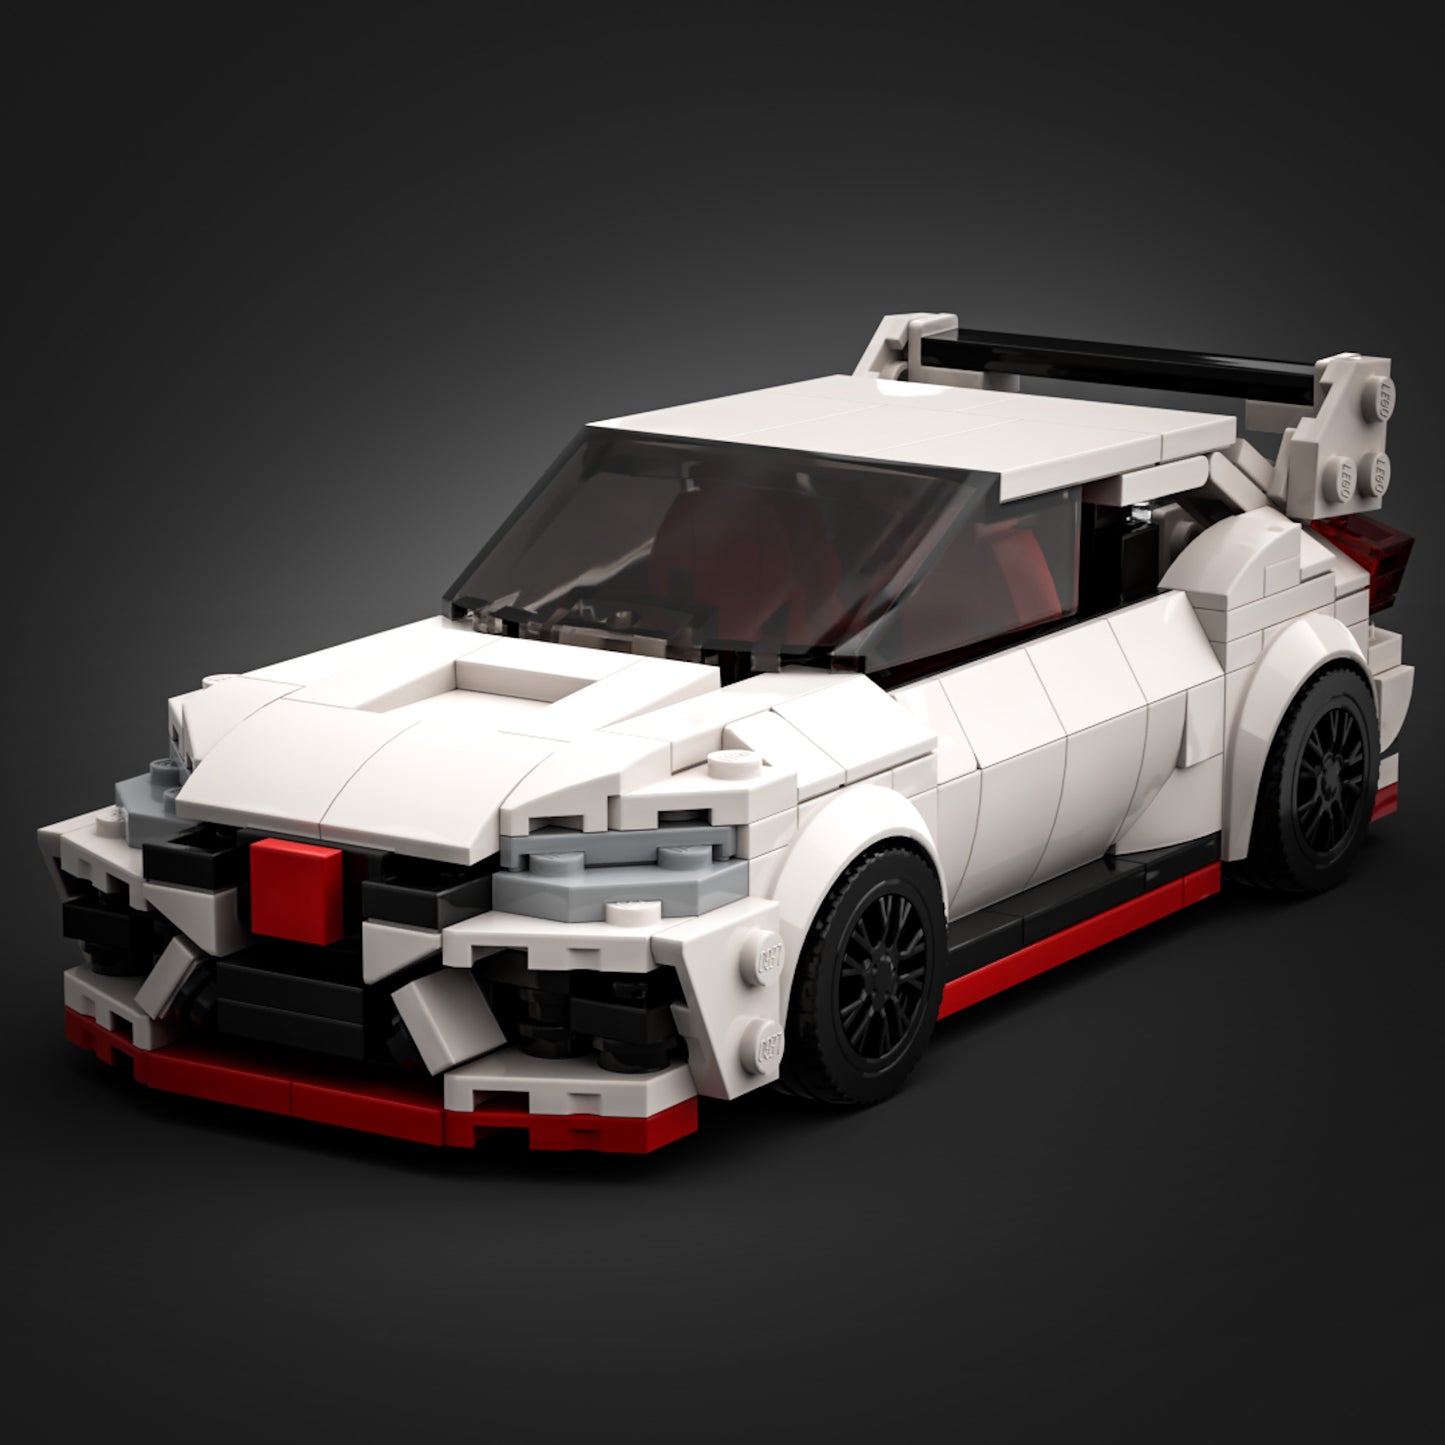 Inspired by Honda Civic Type R - White (instructions)